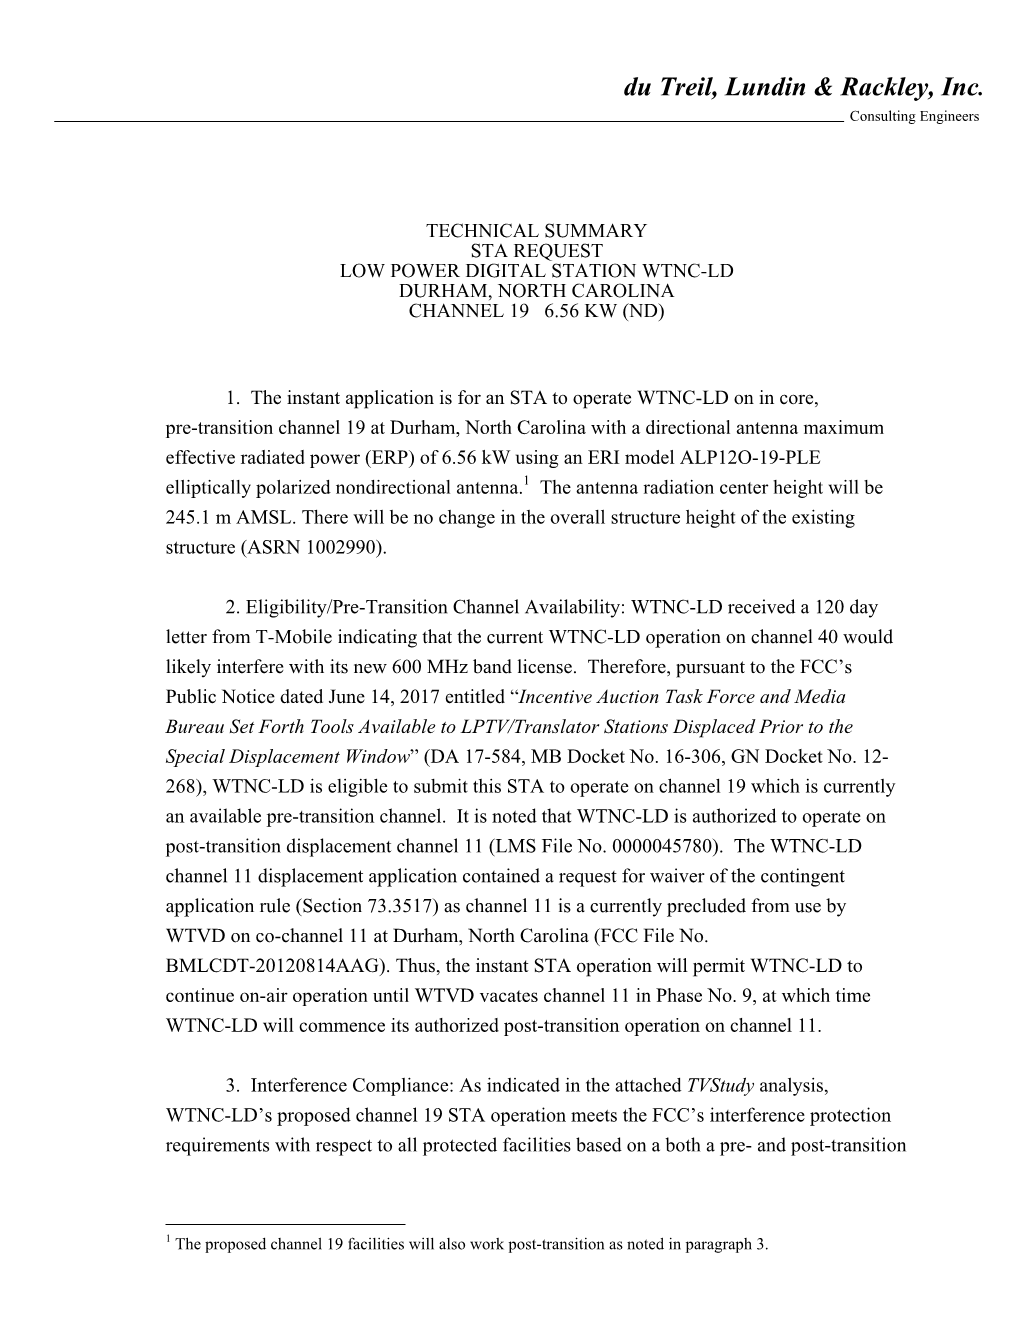 WTNC-LD STA Justification and Technical Summary.Pdf